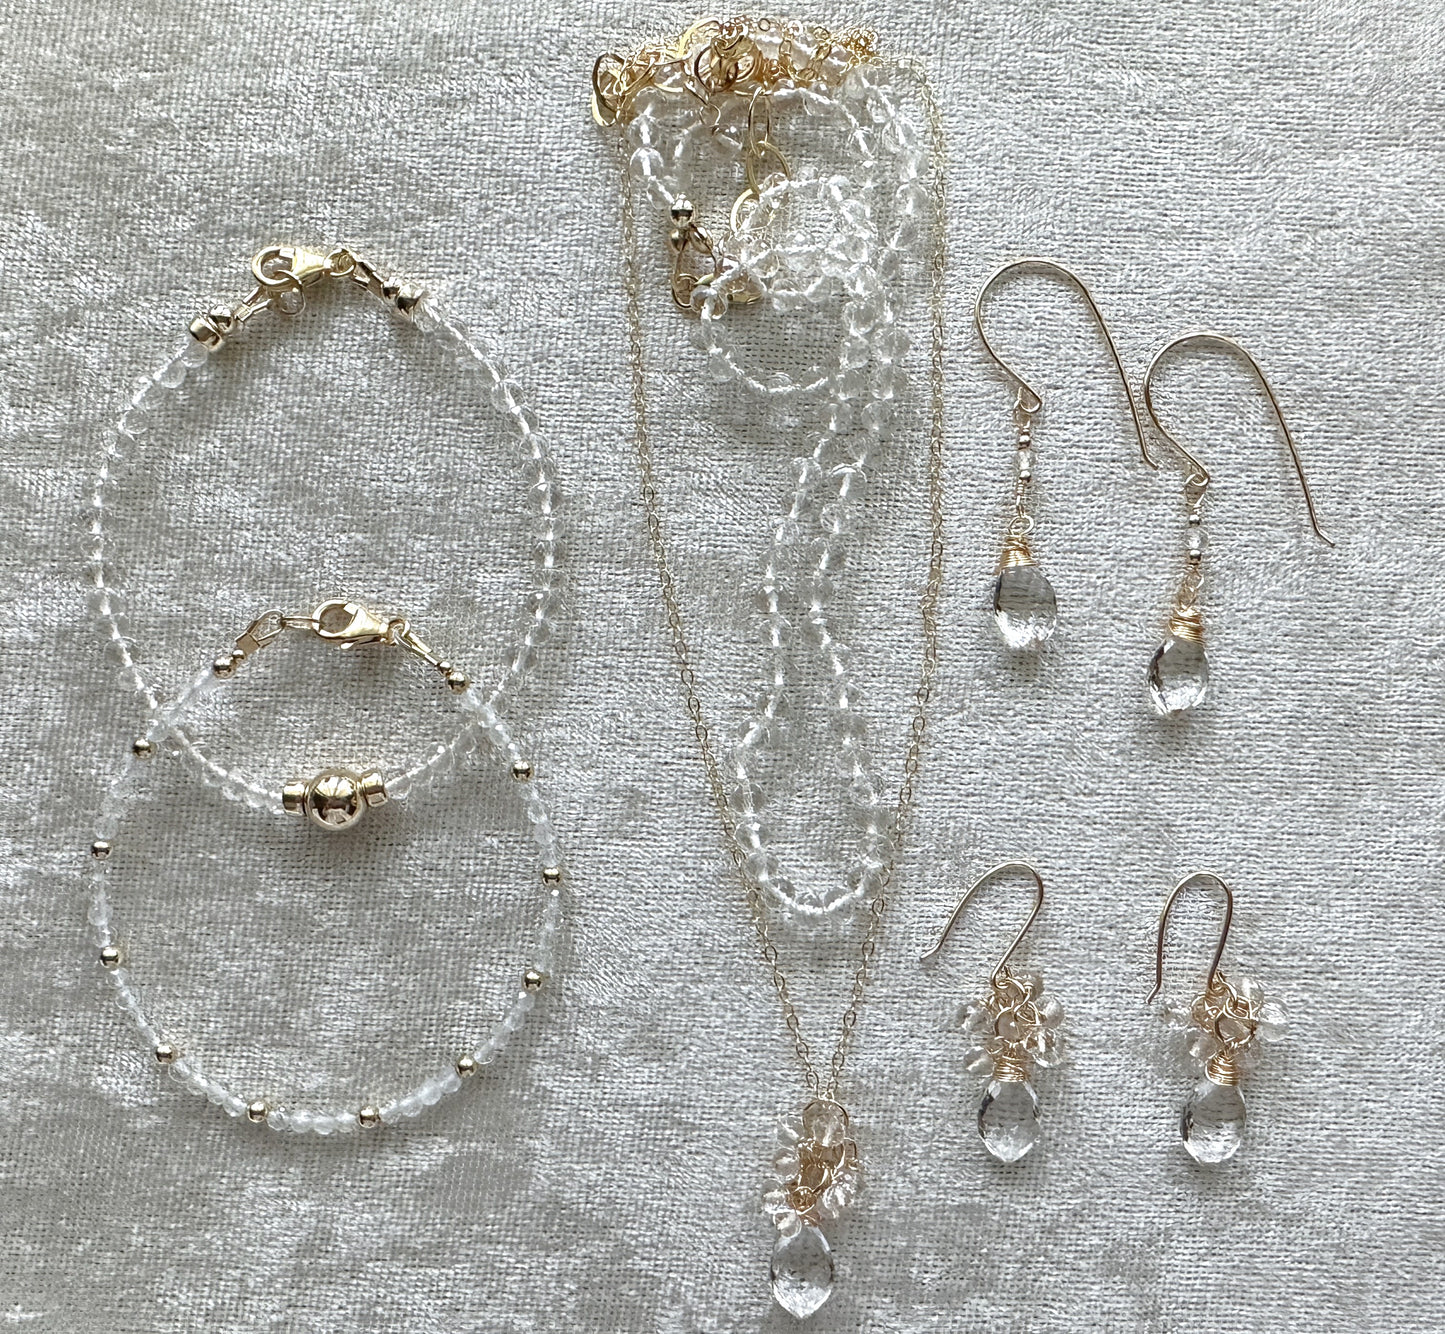 Rock Crystal Mini Cluster Necklace and Earrings